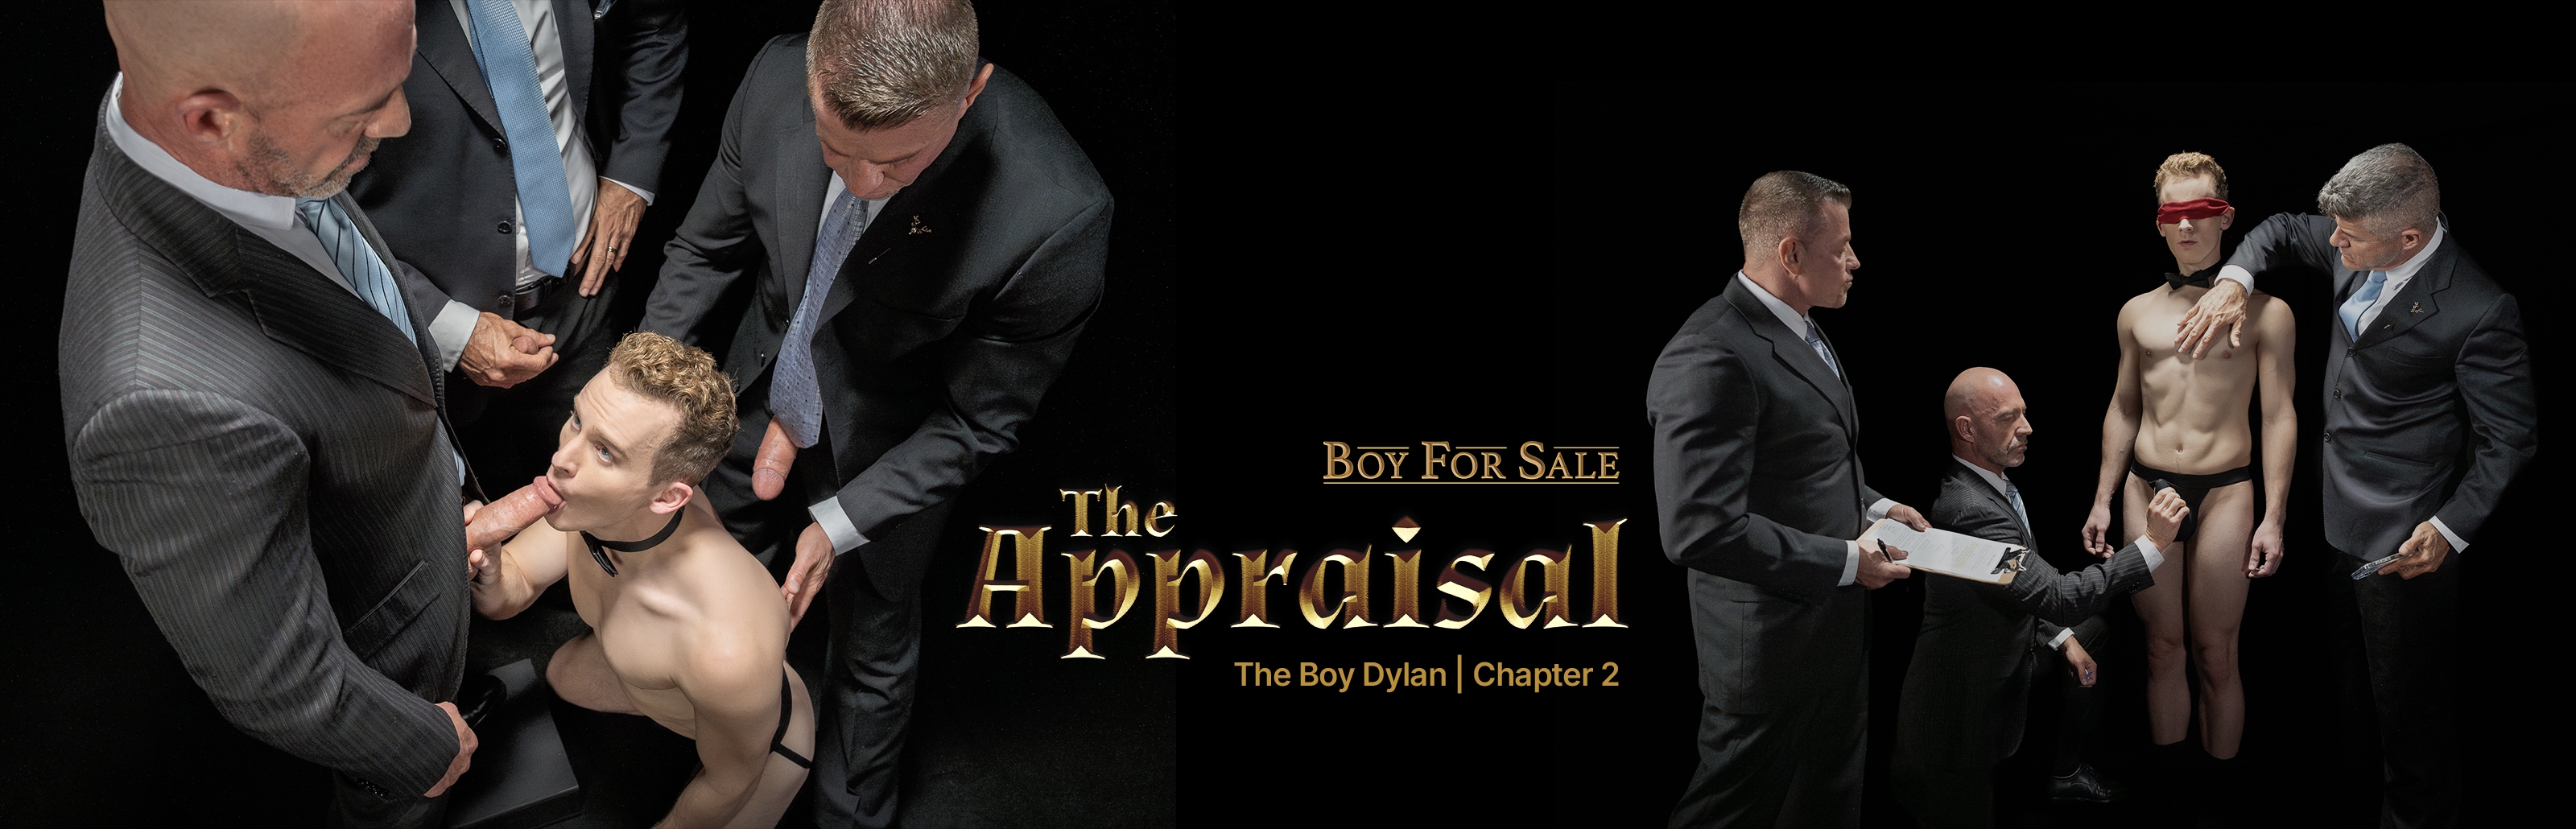 The Appraisal | THE BOY DYLAN | Chapter 2 Photos 97